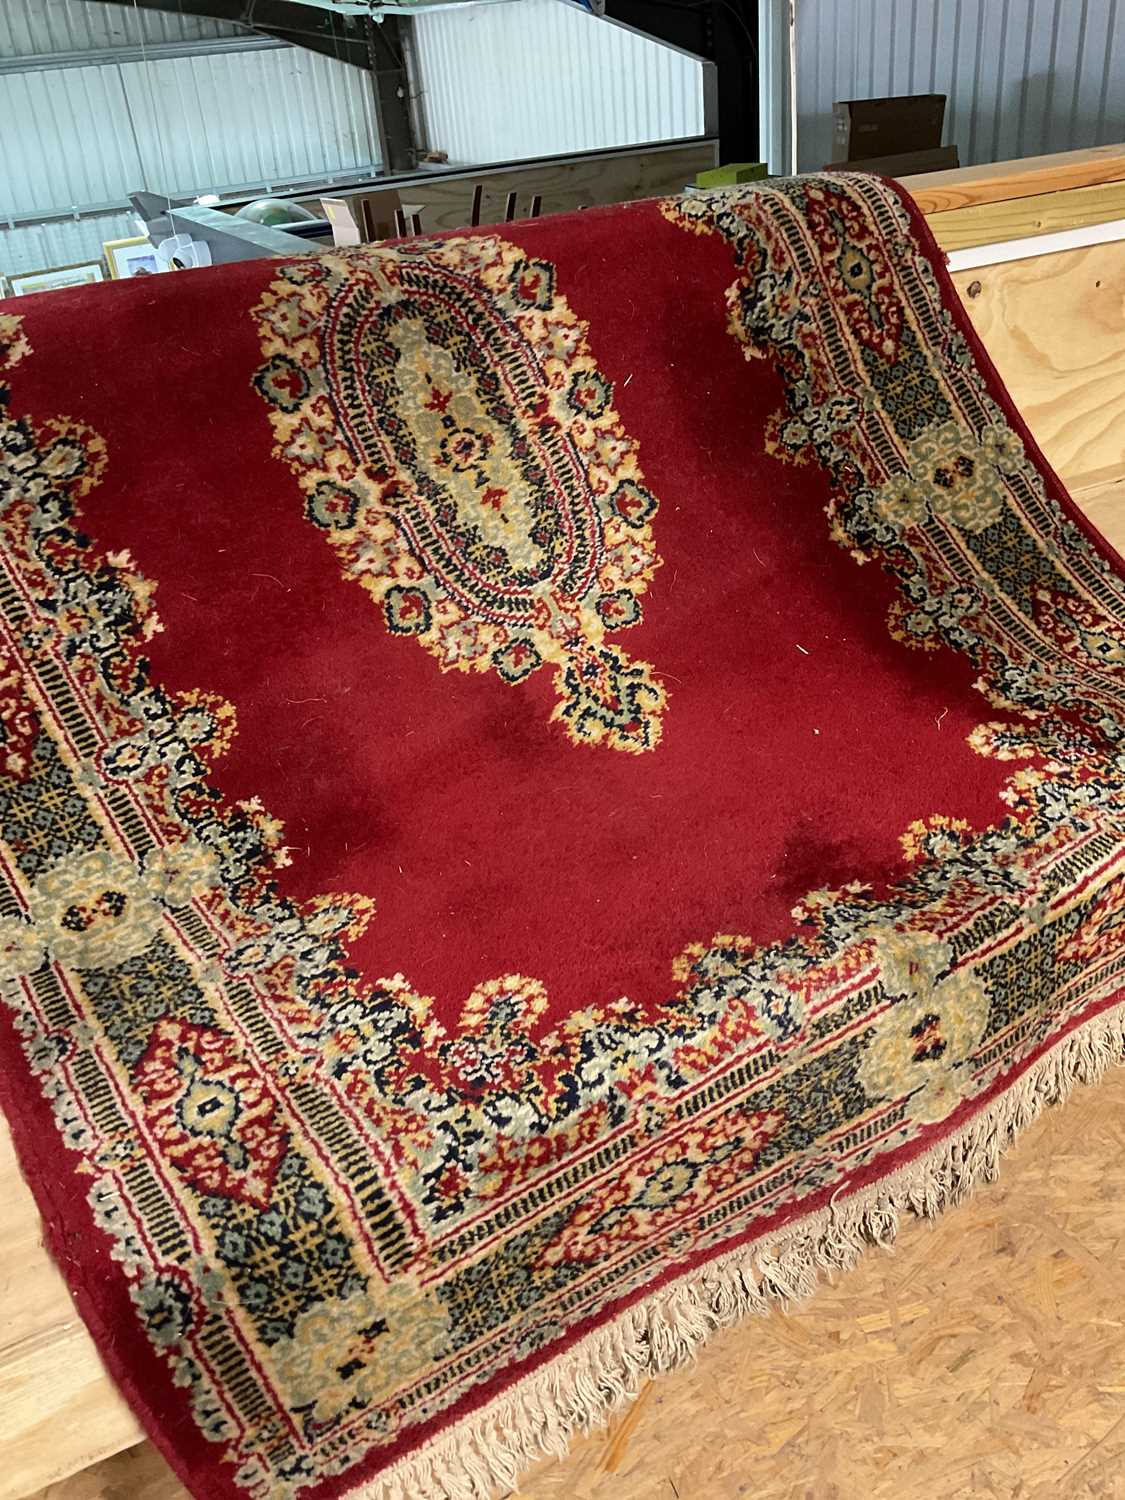 Two vintage Eastern rugs, one a dark red rug with central medallion and decorative border, 122 x - Image 6 of 6